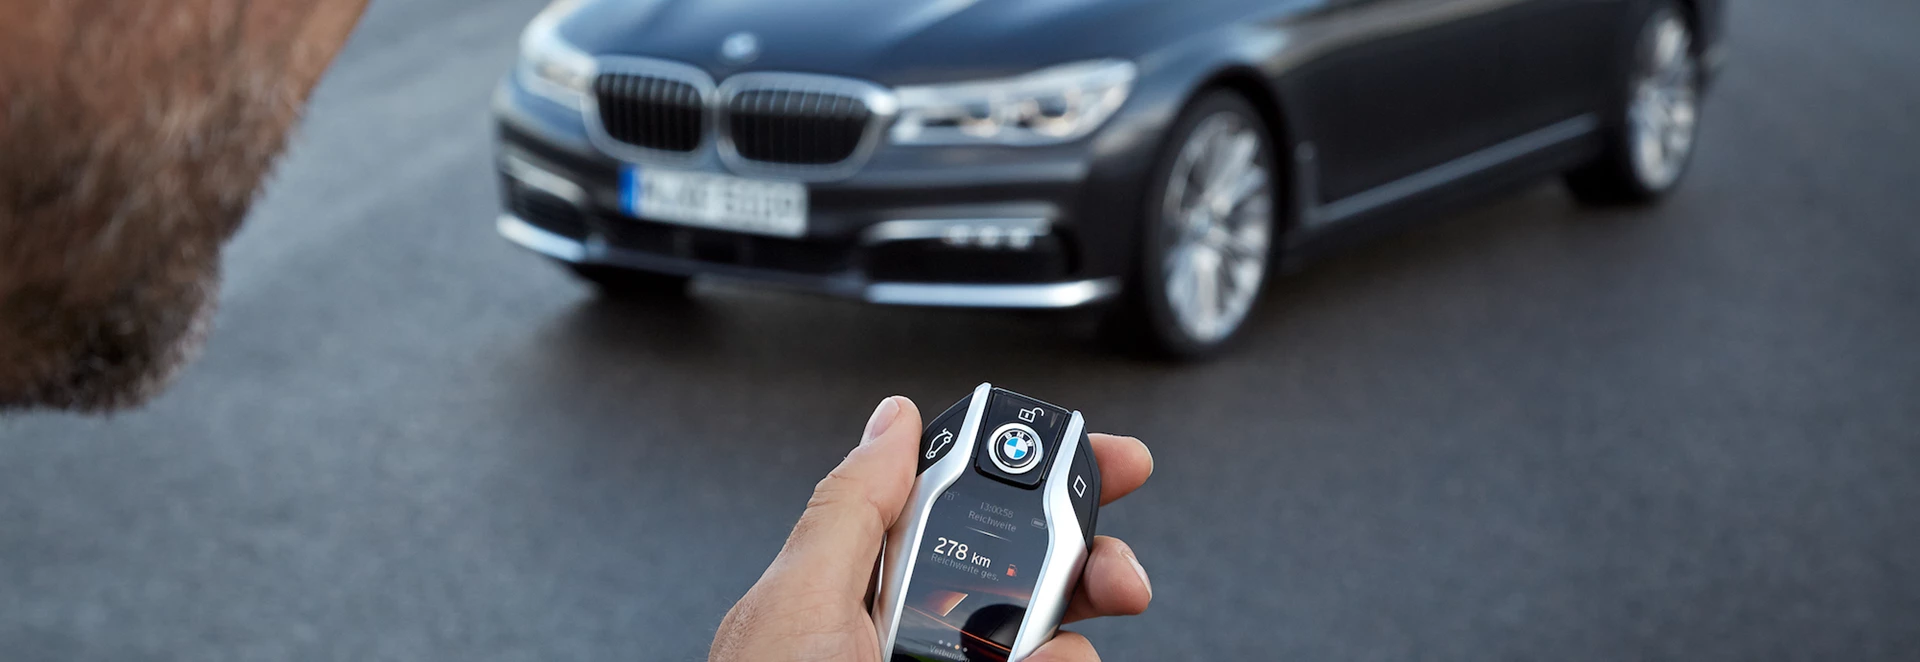 How To Disable Bmw Car Alarm